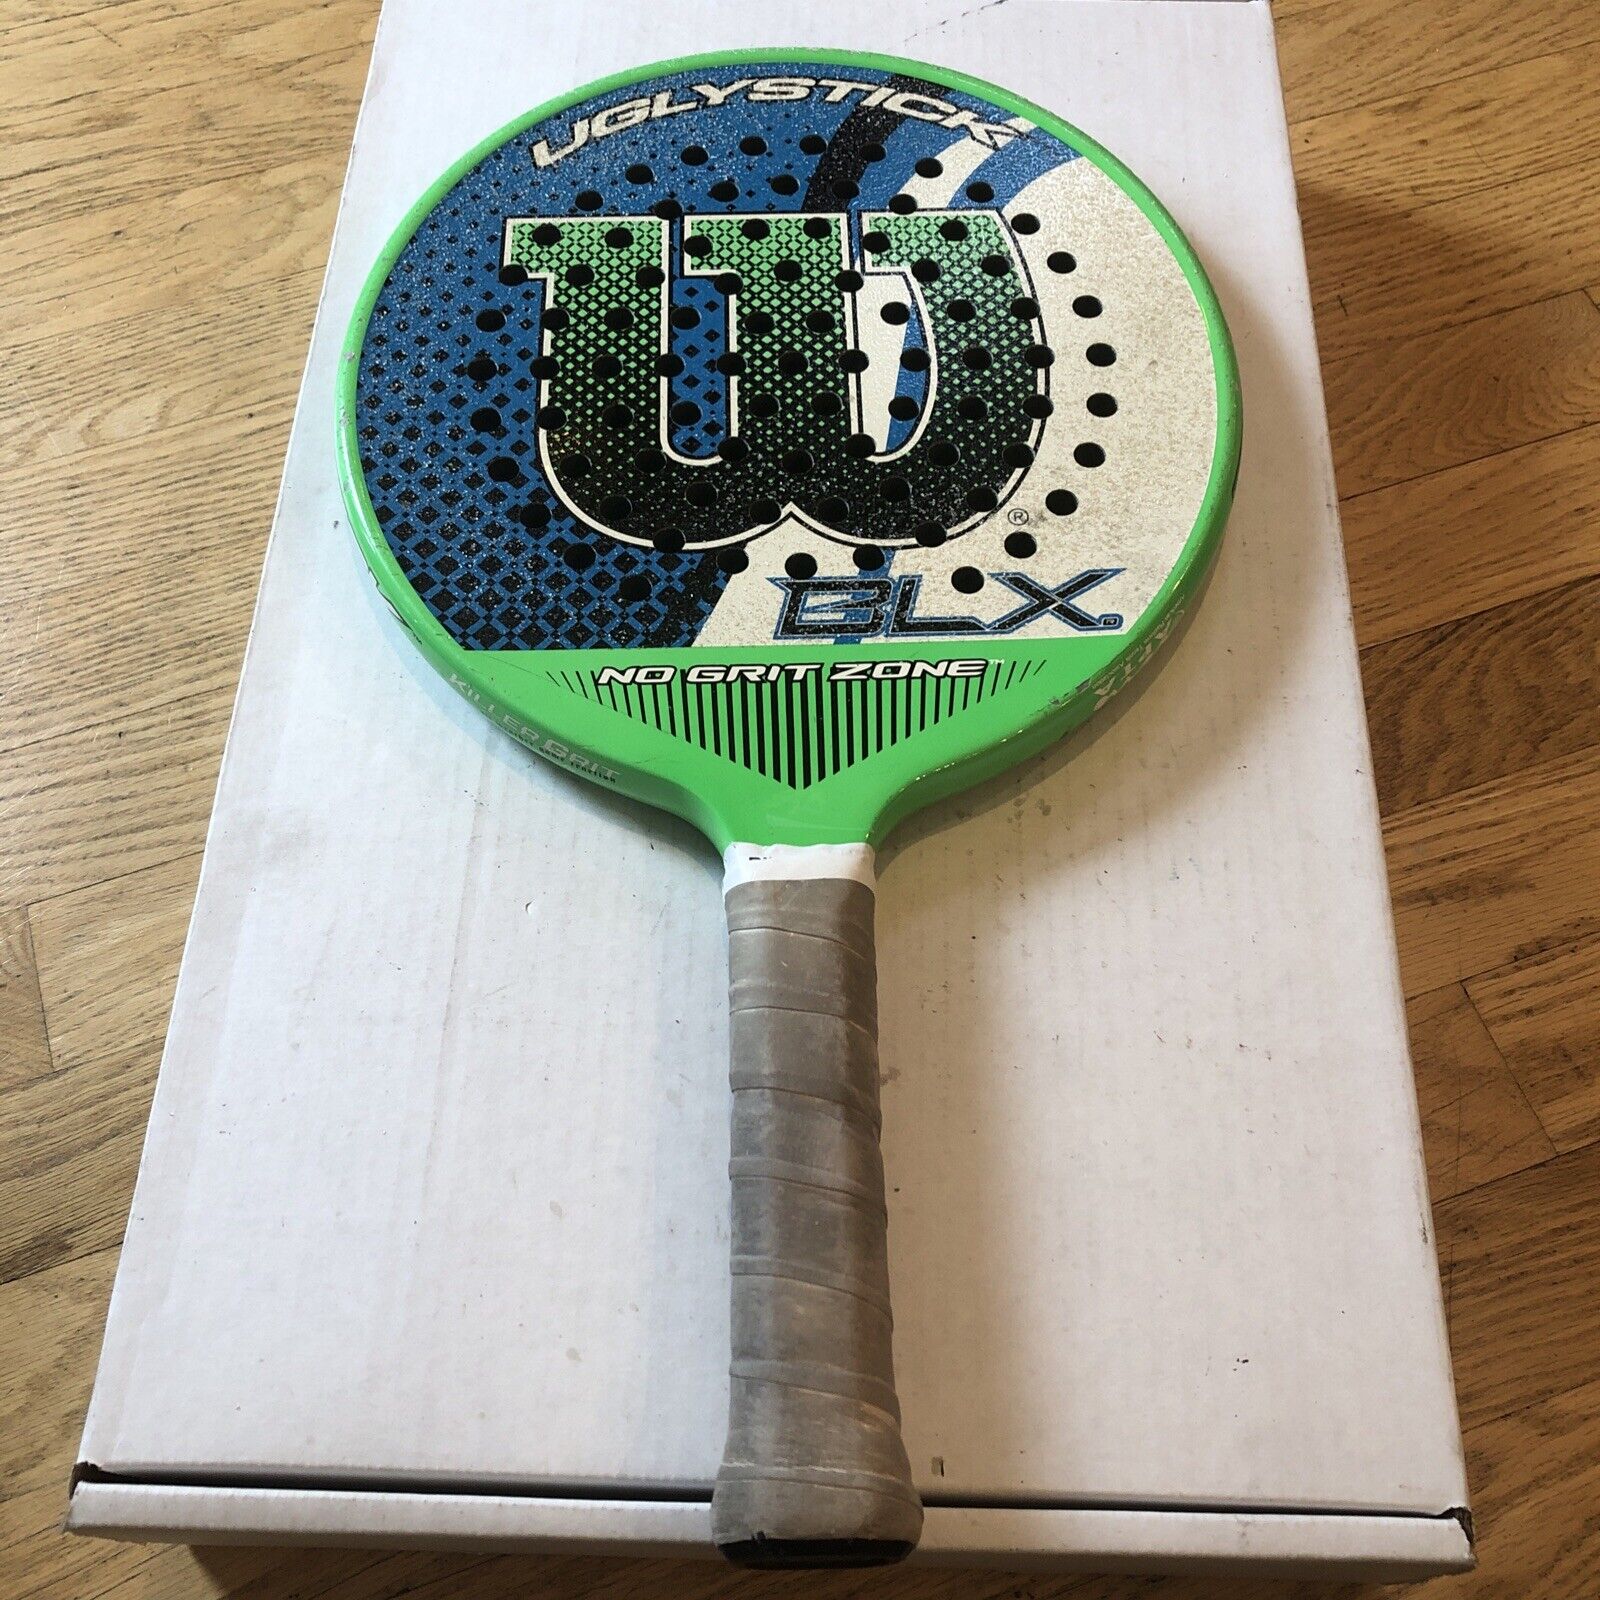 Wilson No Grit Zone Killer Grit Paddles Pickle Ball Ugly Stick Paddle tennis￼